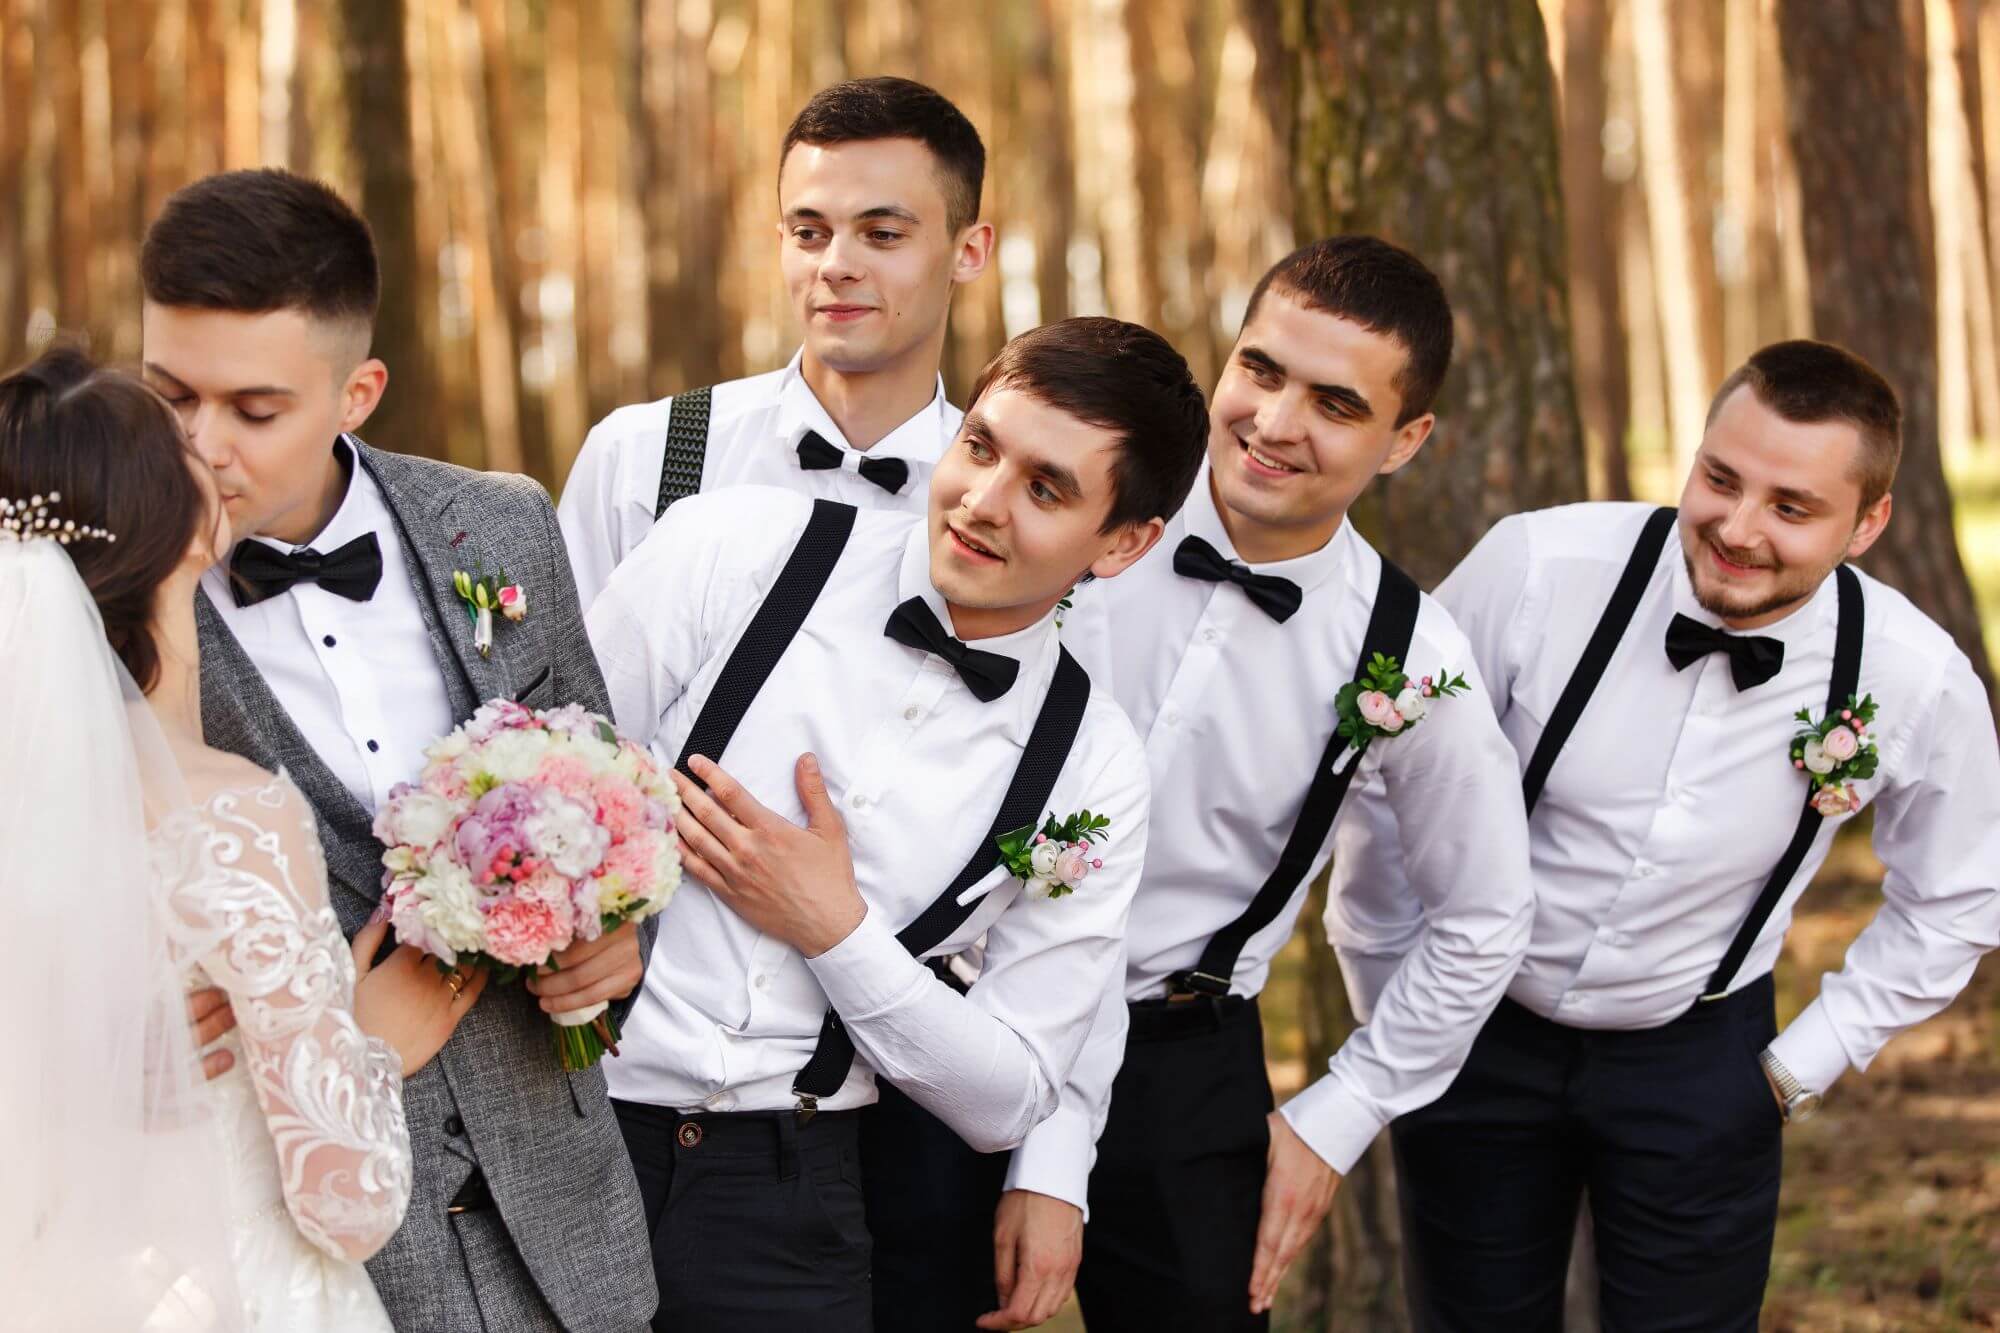 The Ultimate Groomsman Duty Checklist Tips for the Best Man